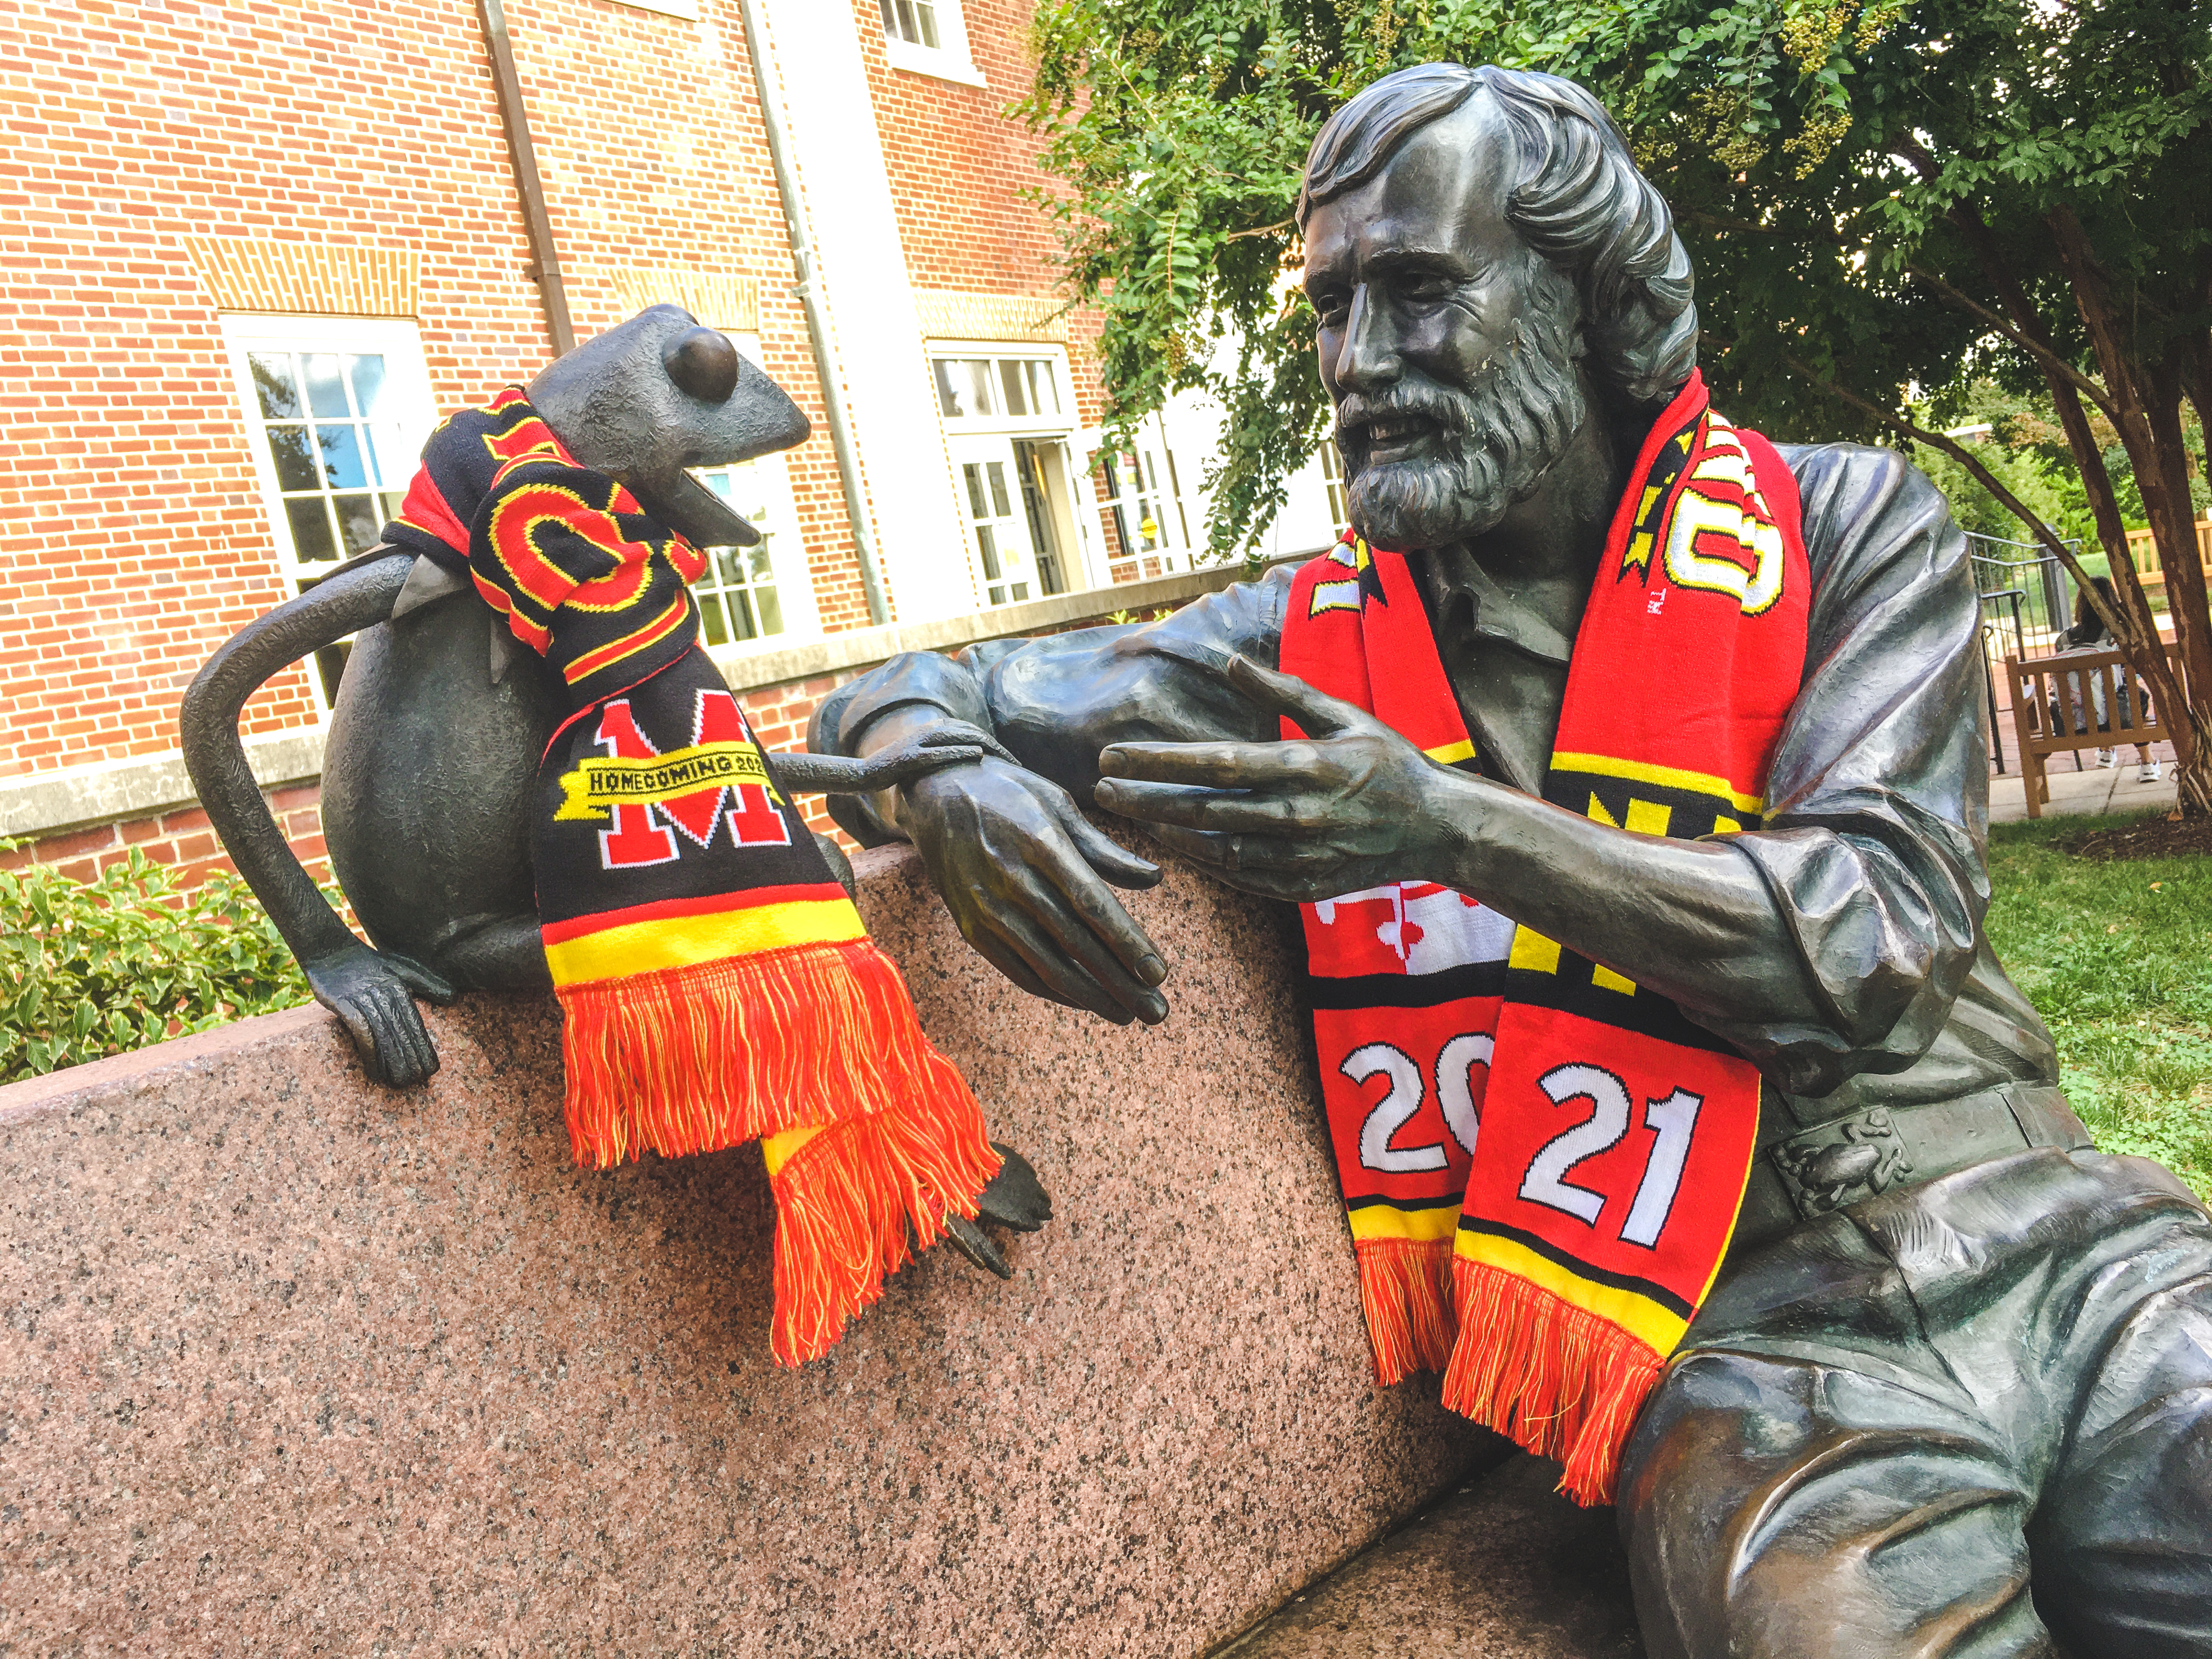 Jim Henson, Kermit, and the 2021 Homecoming Scarf